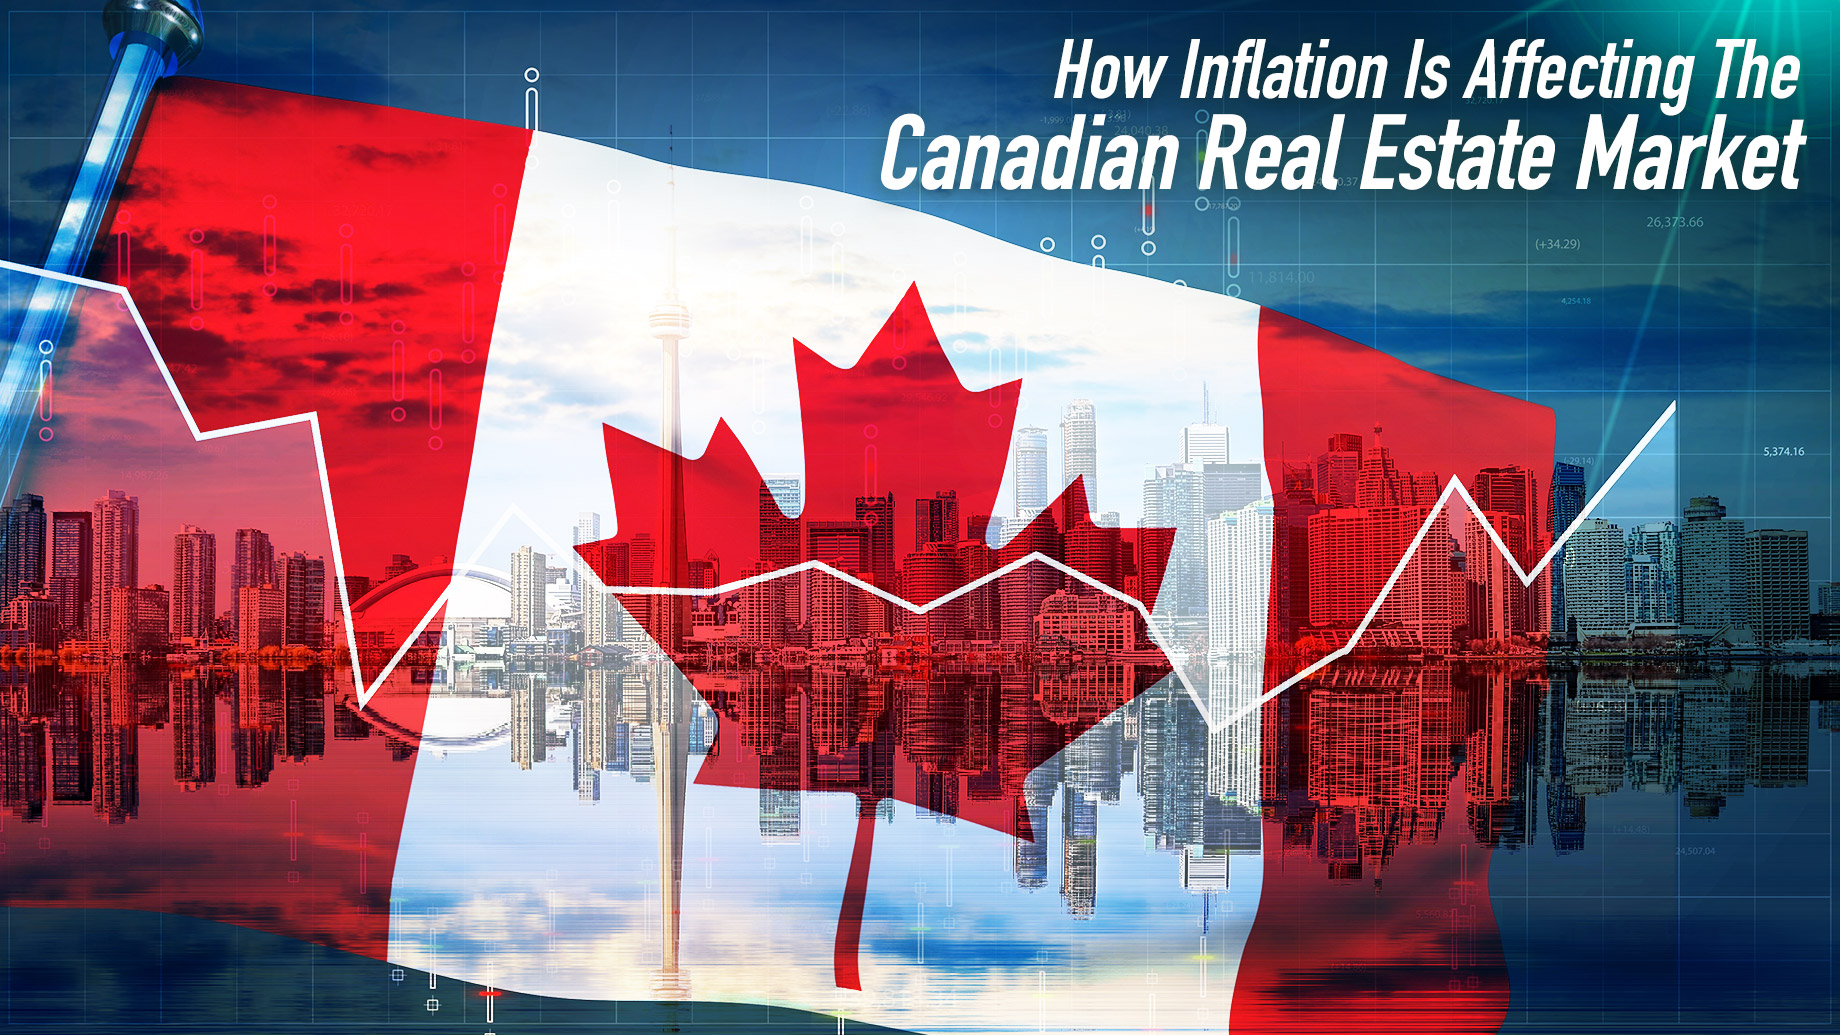 How Inflation Is Affecting The Canadian Real Estate Market